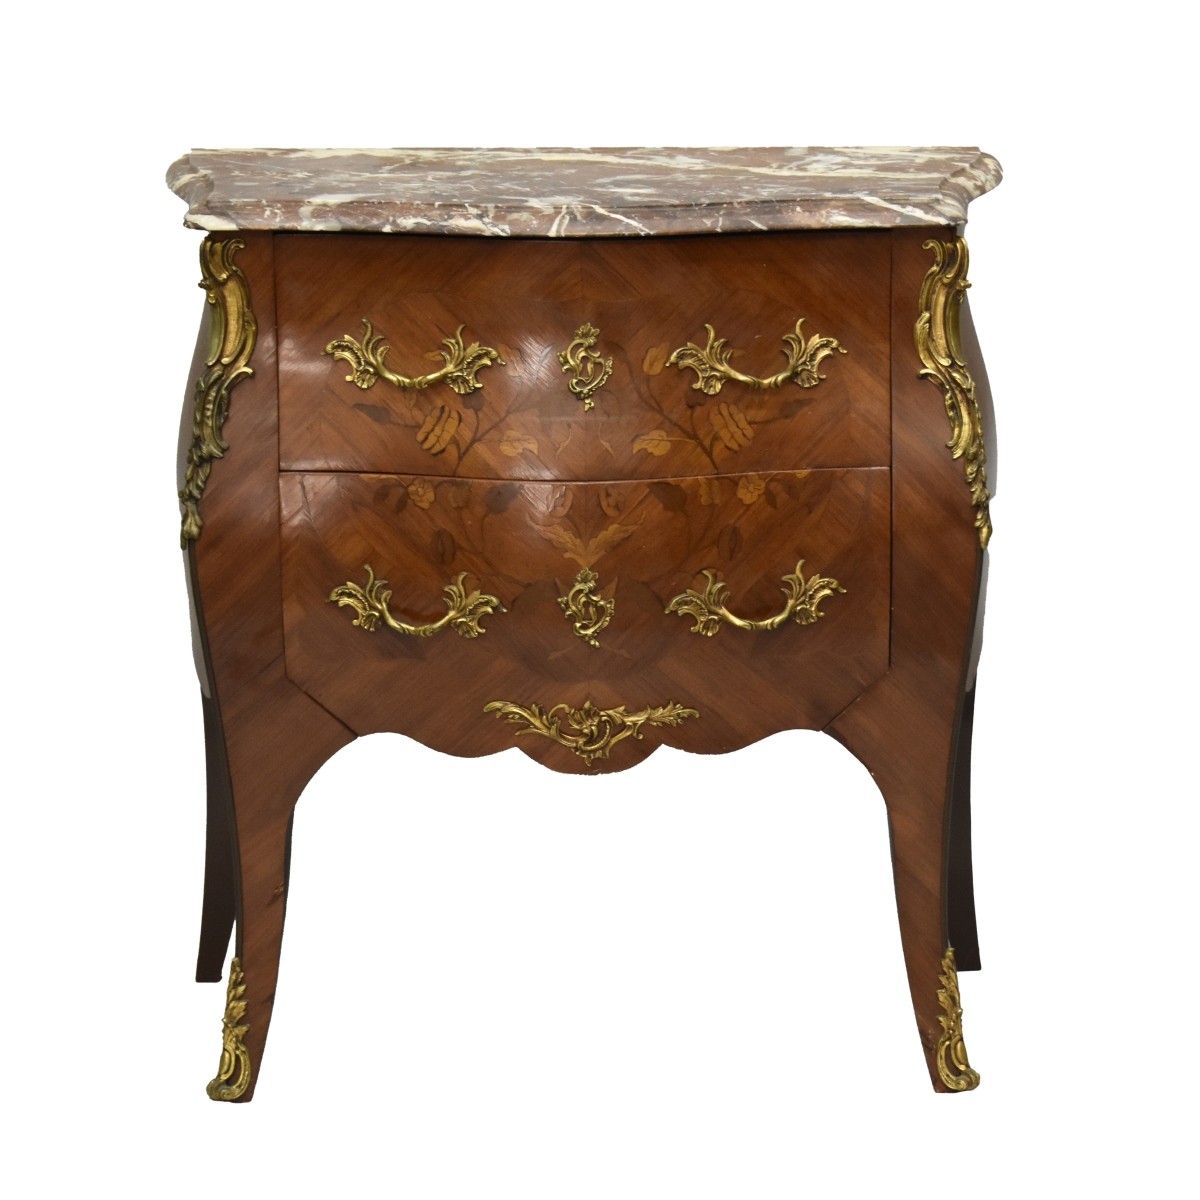 Mid 20th C. Louis XVI Style Commode